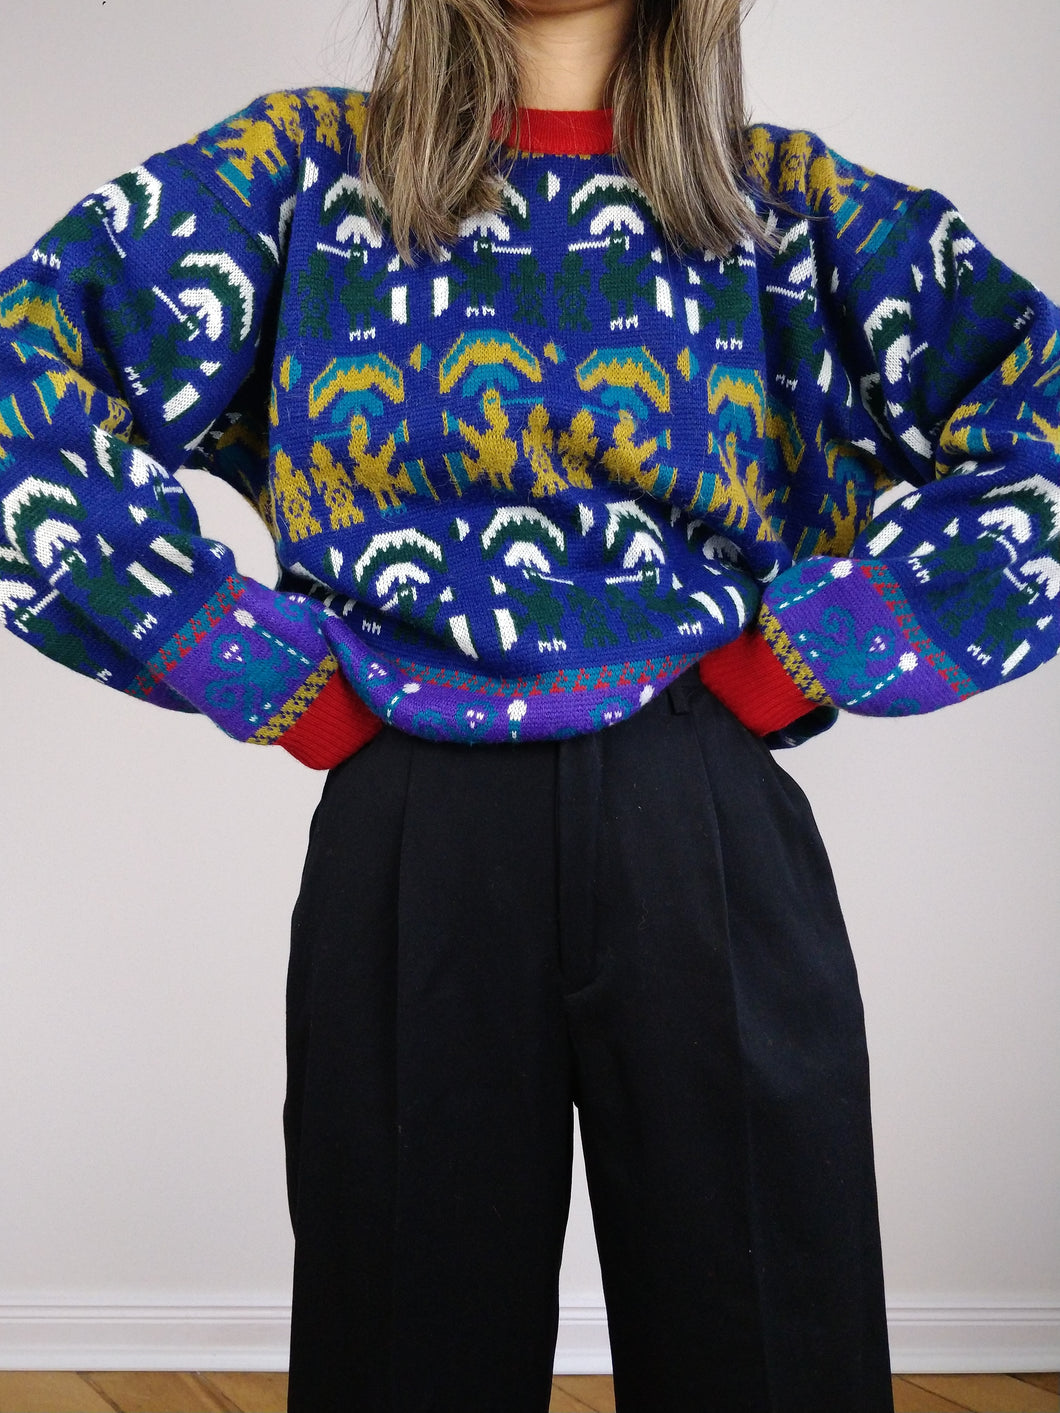 The Purple Pattern Knit | Vintage wool sweater pullover abstract pattern knitted jumper blue red M